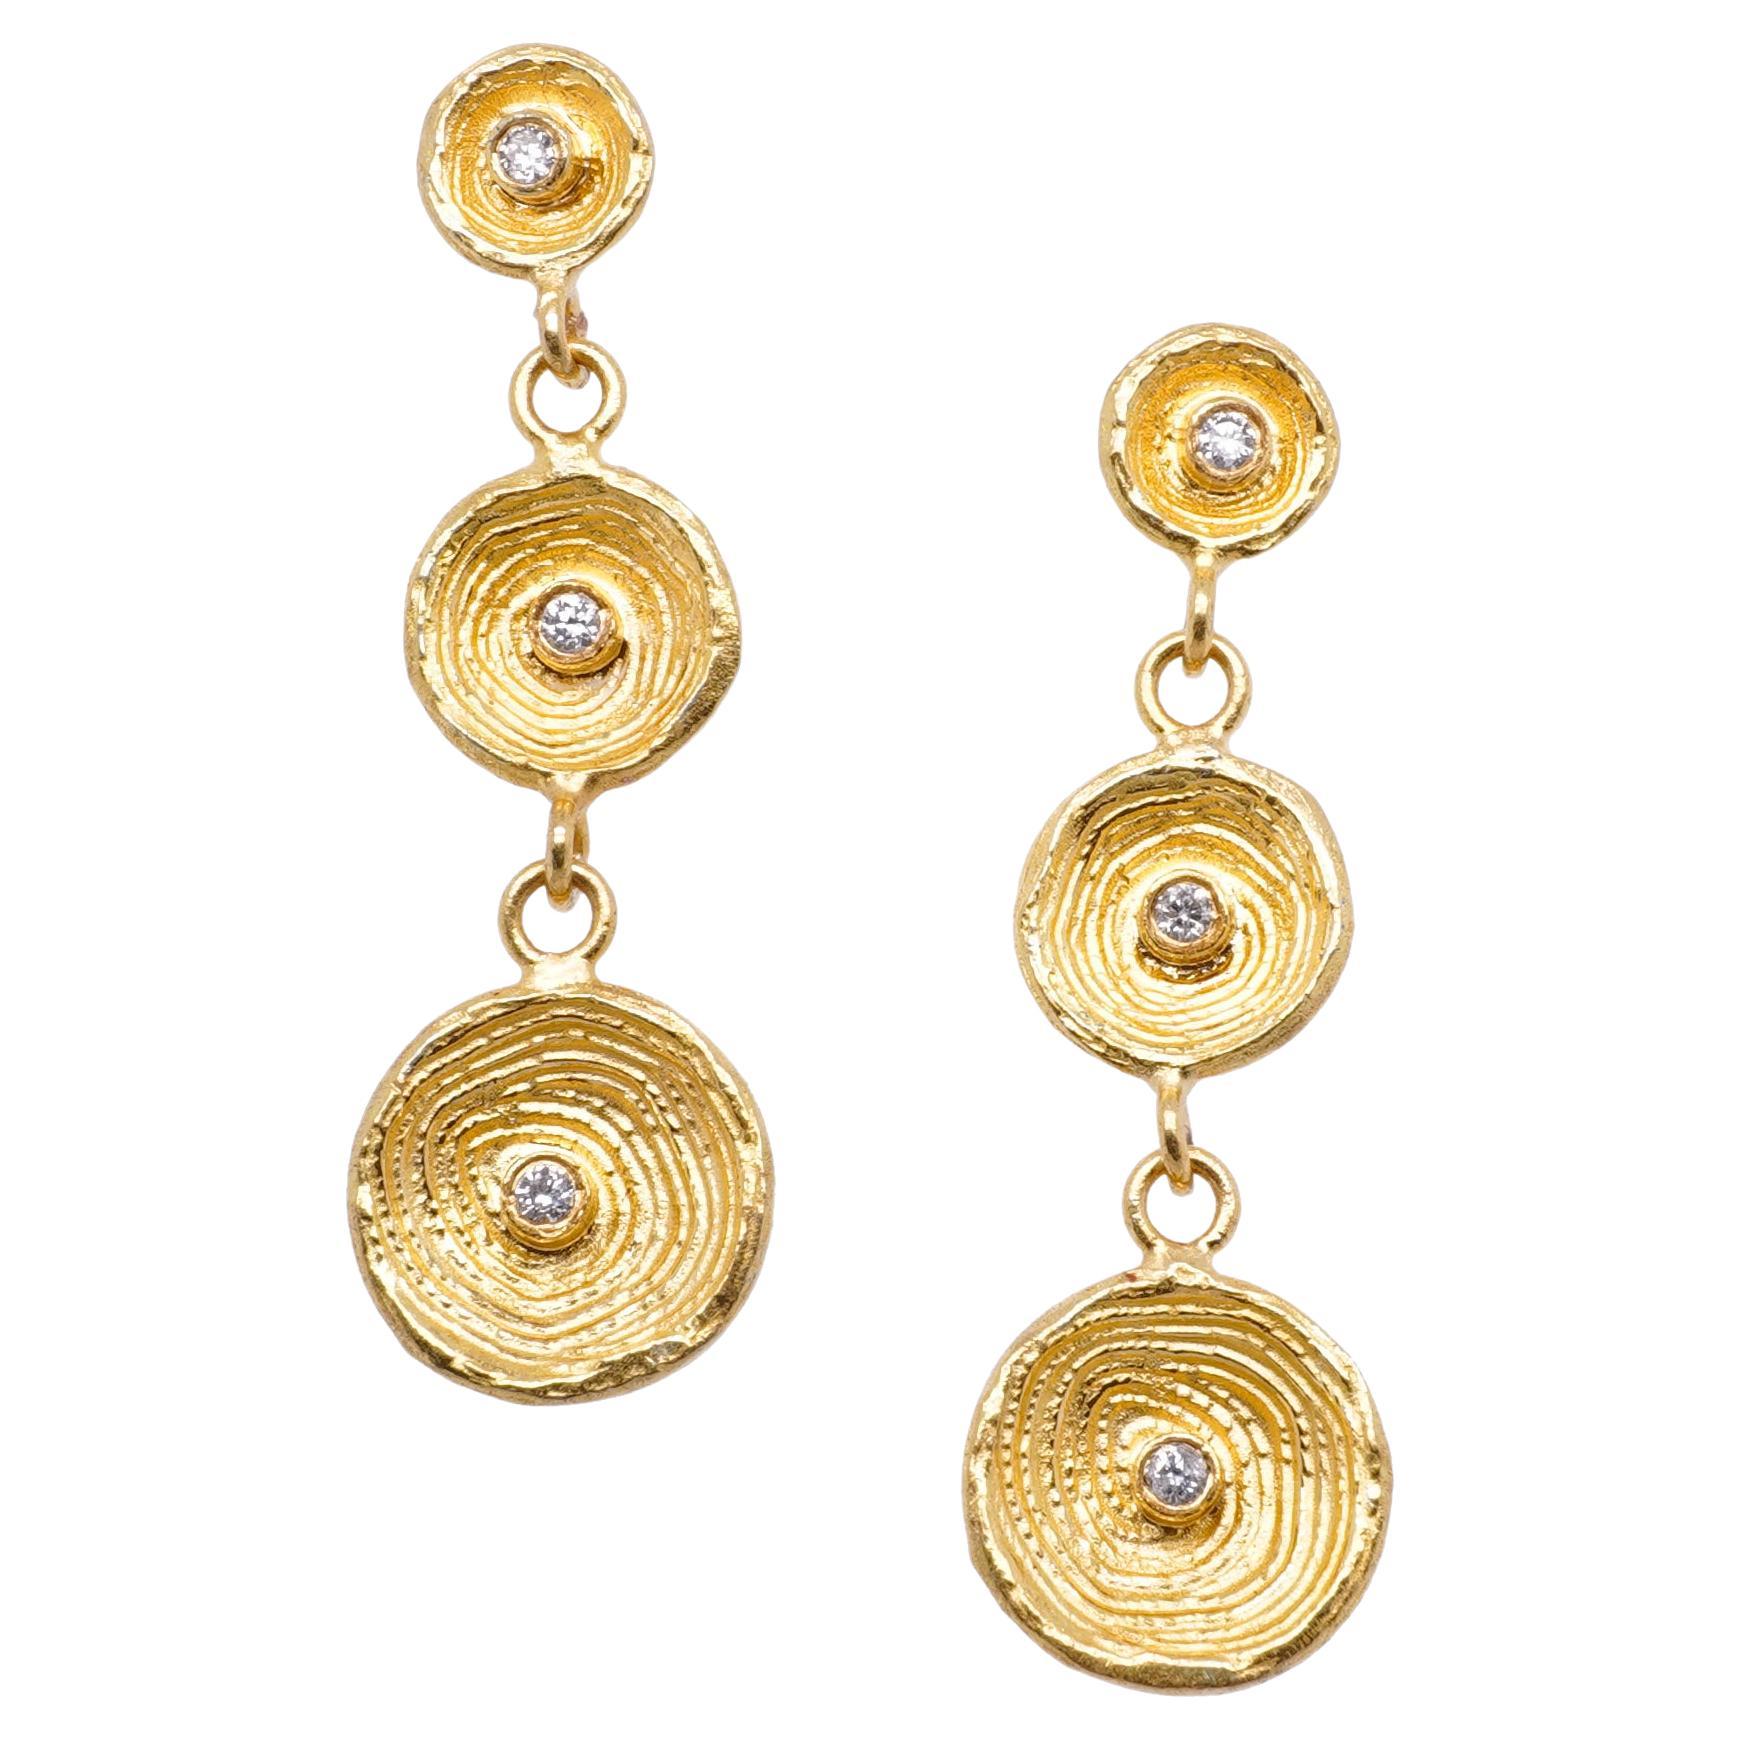 Circle of Life, Disc, Cup Triple Dangle Earrings with Diamond Detail, 24kt Gold von Prehistoric Works of Istanbul, Türkei. Gesamtlänge: 29mm (1.1